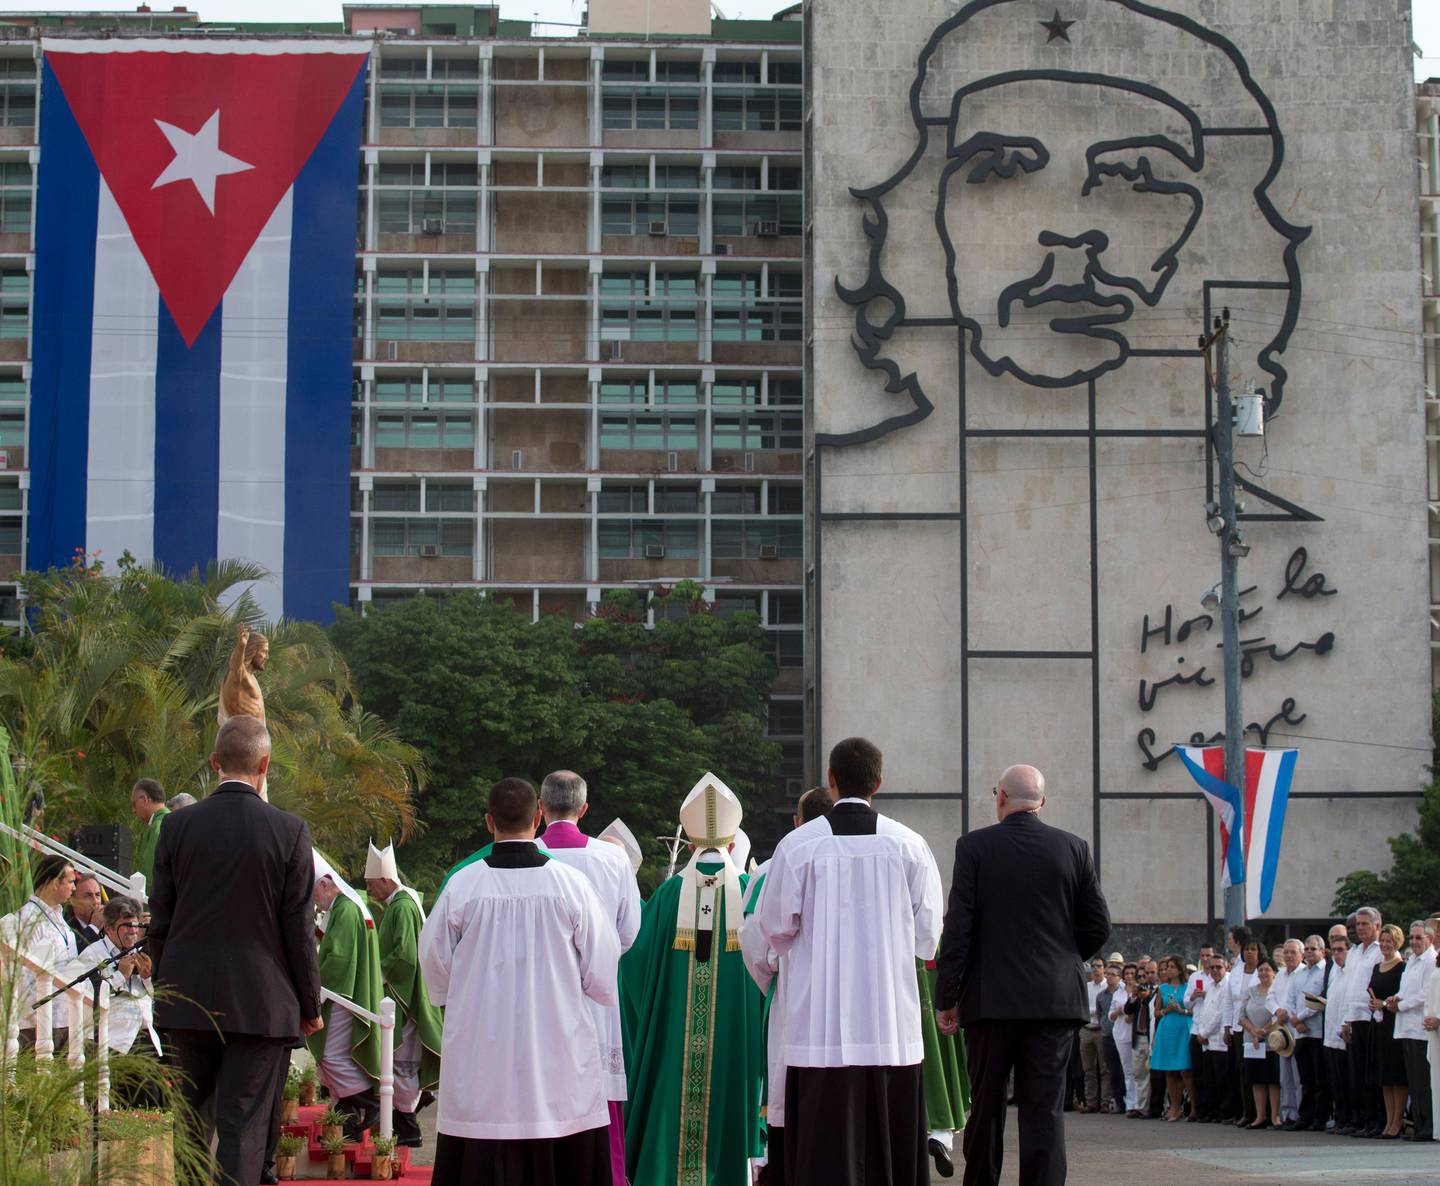 Pope Francis, center, arrives for Mass at Revolution Plaza in Havana, Cuba, Sunday, Sept. 20, 2015, where a sculpture of revolutionary hero Ernesto "Che" Guevara and a Cuban flag decorate a government building. Pope Francis opens his first full day in Cuba on Sunday with what normally would be the culminating highlight of a papal visit: Mass before hundreds of thousands of people in Havana's Revolution Plaza. (AP Photo/Alessandra Tarantino)